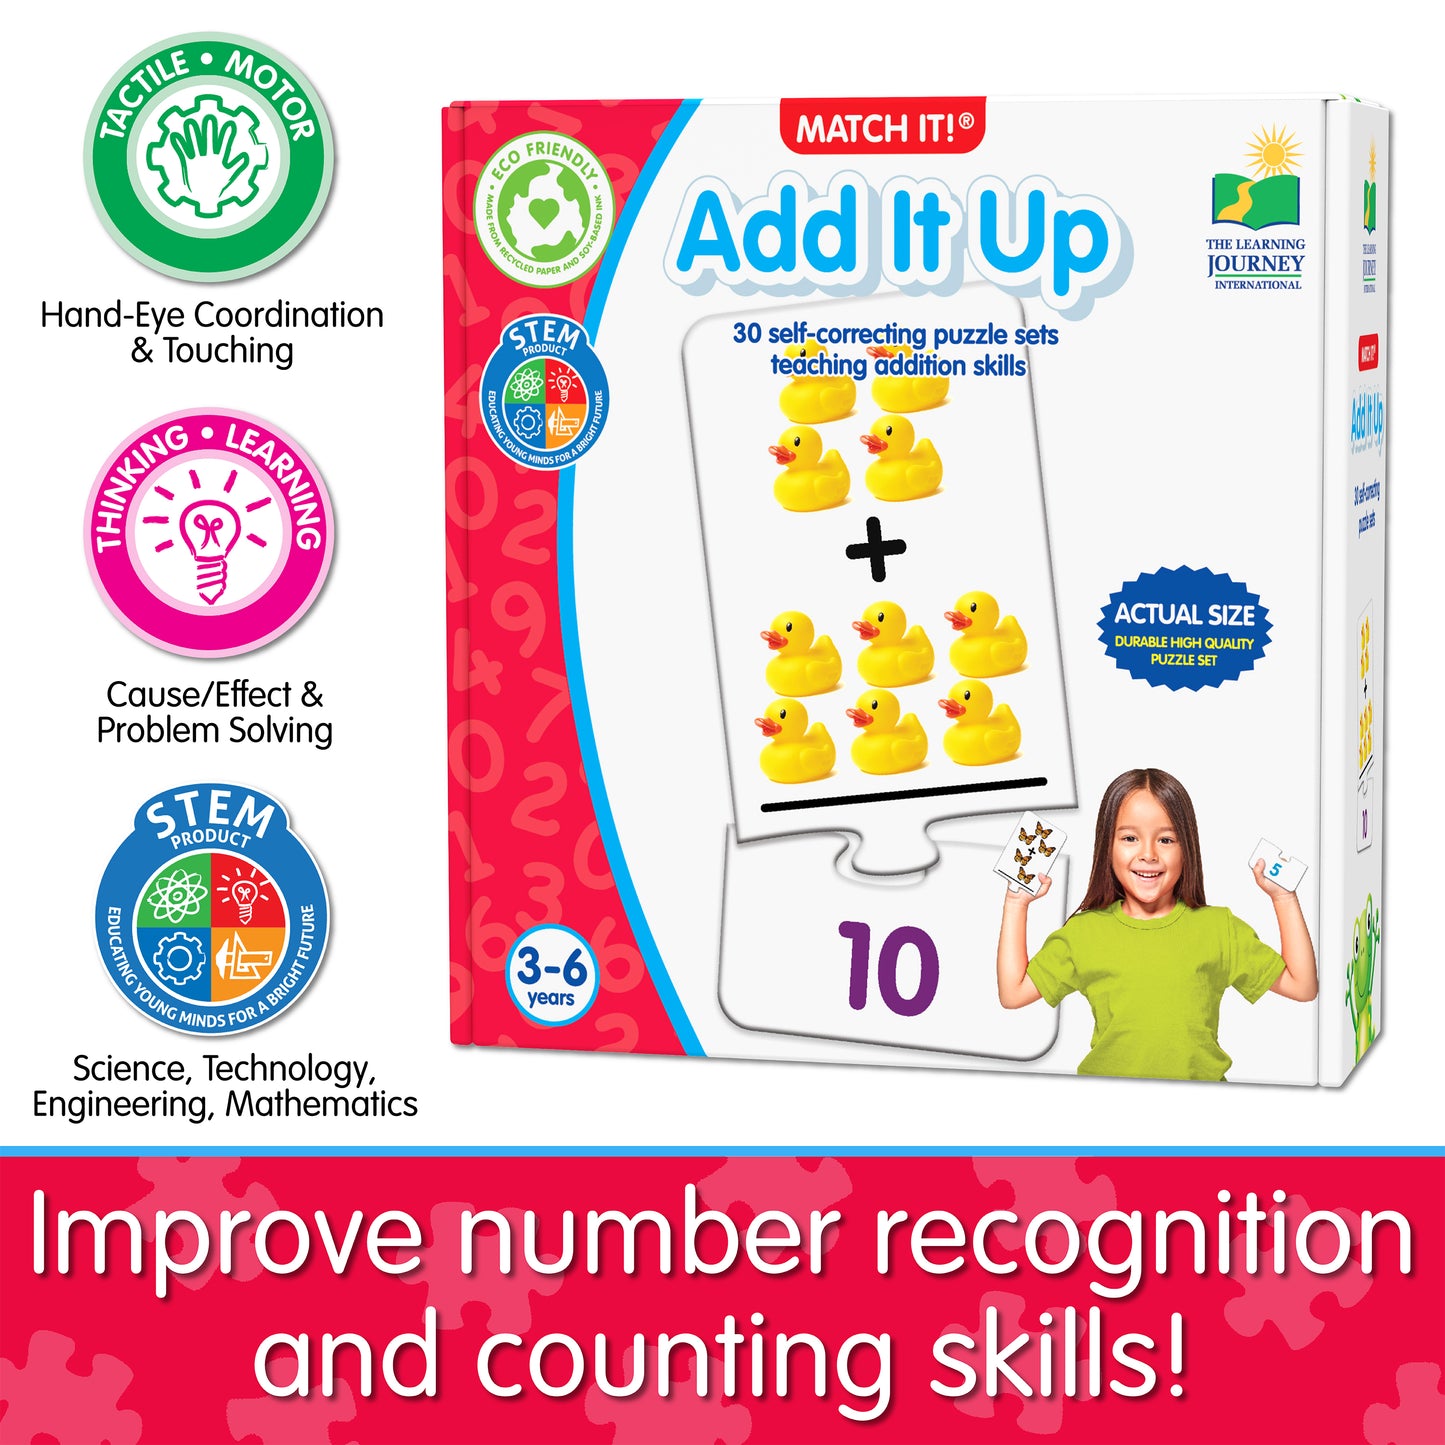 Infographic about Match It - Add It Up's educational benefits that says, "Improve number recognition and counting skills!"